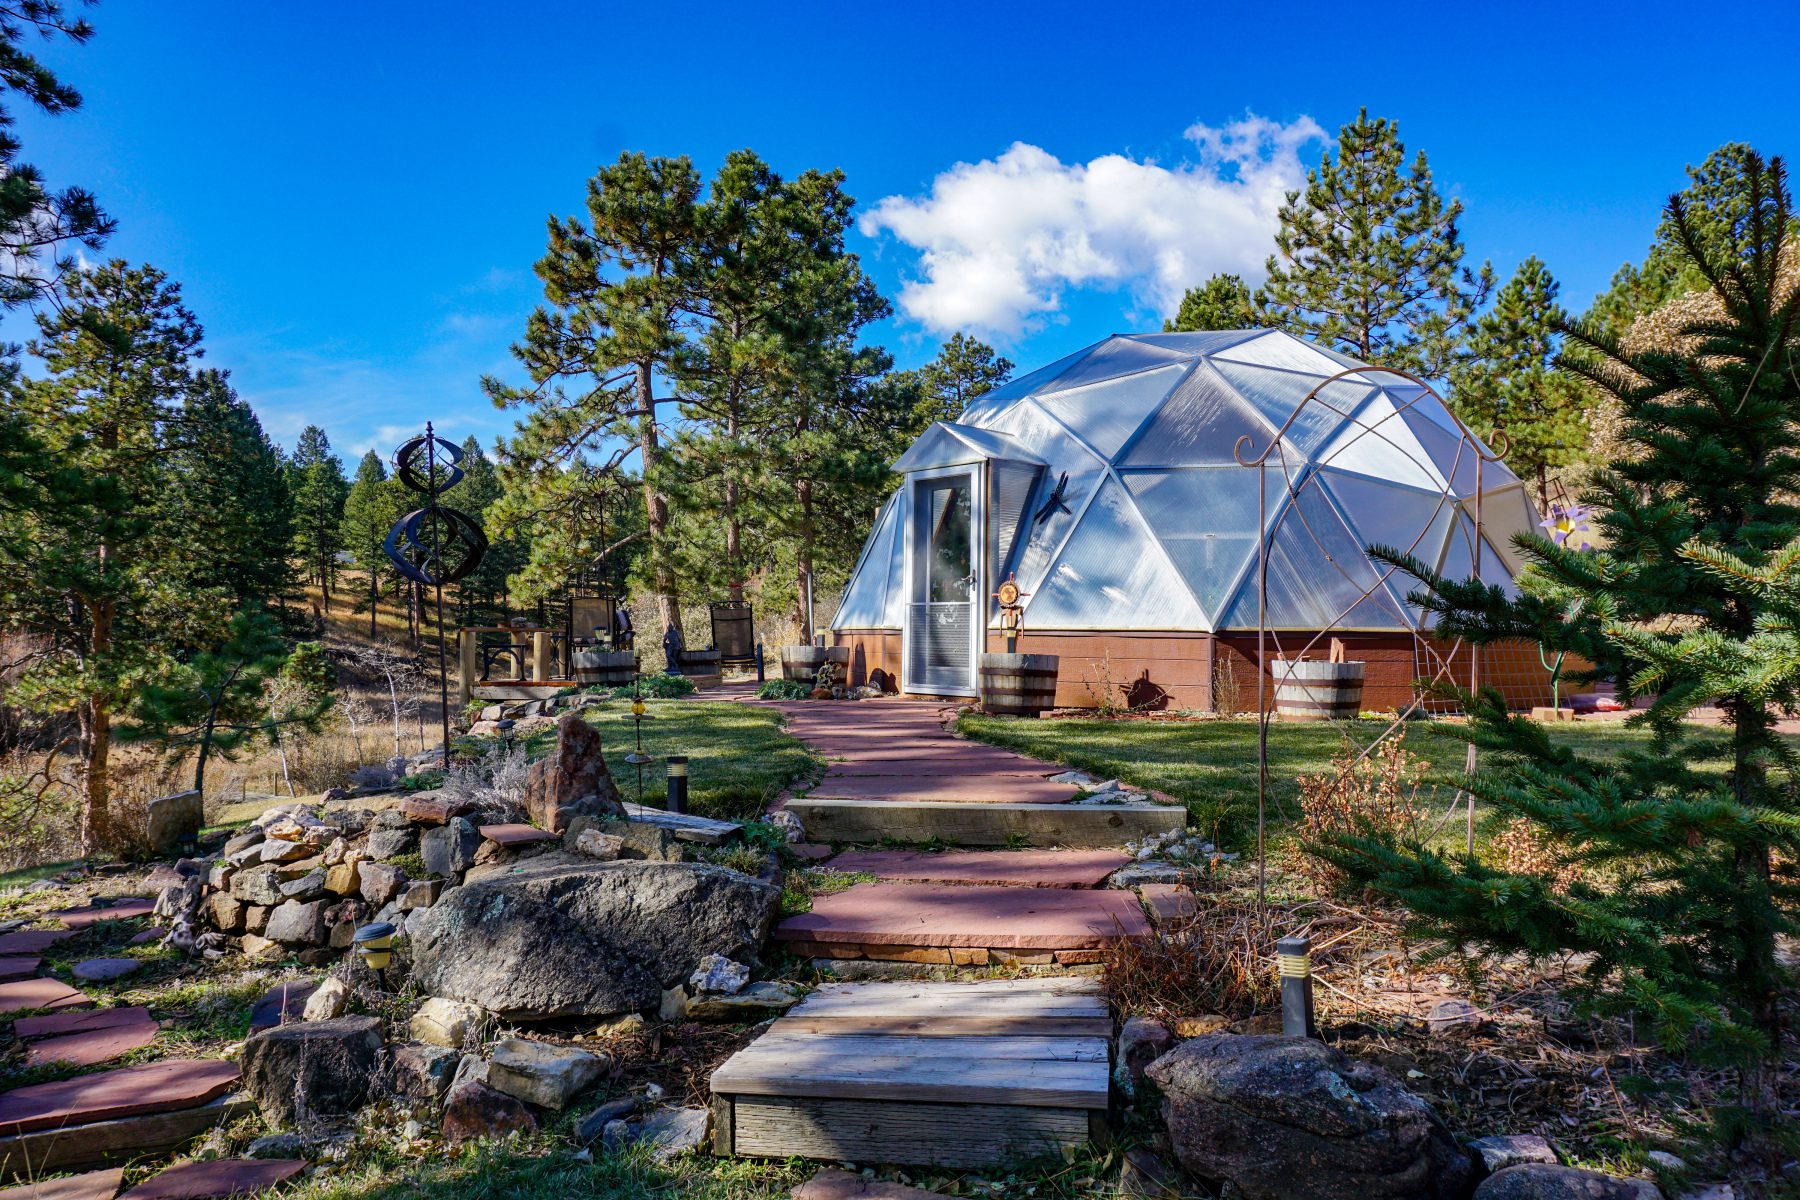 33' Growing Dome Greenhouse